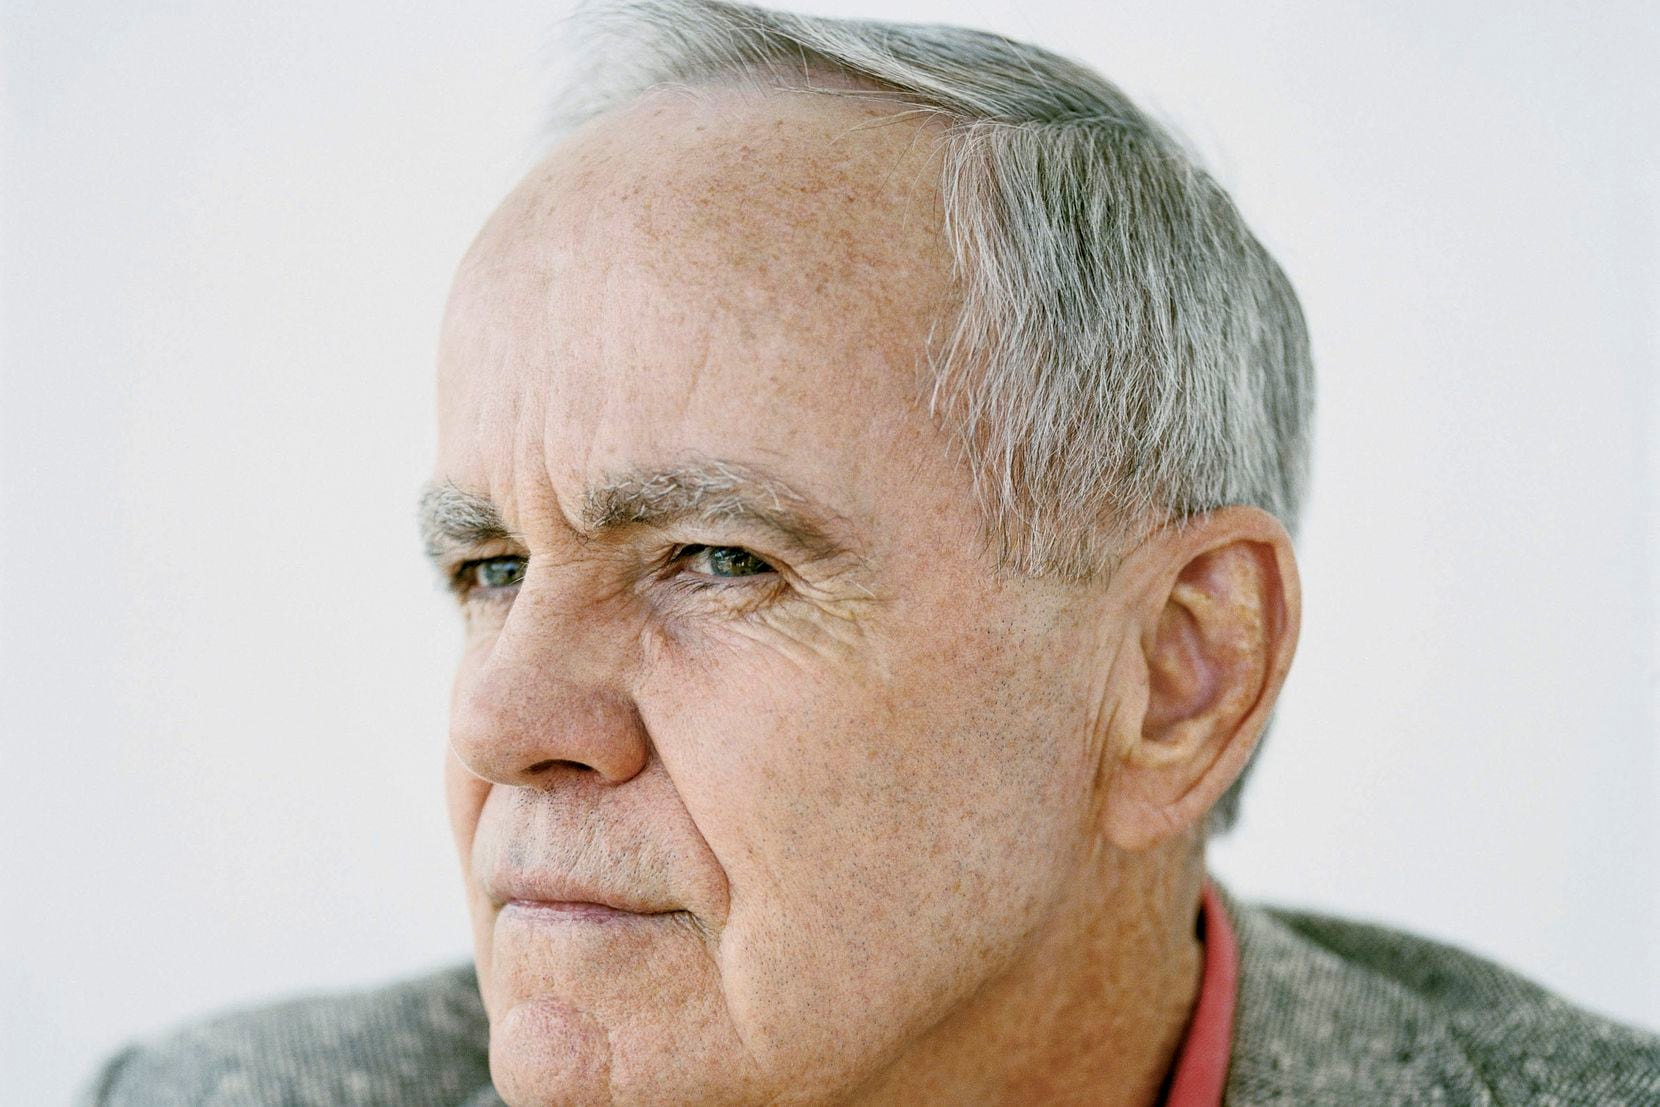 Cormac McCarthy, whose experience in Texas inspired 'No Country